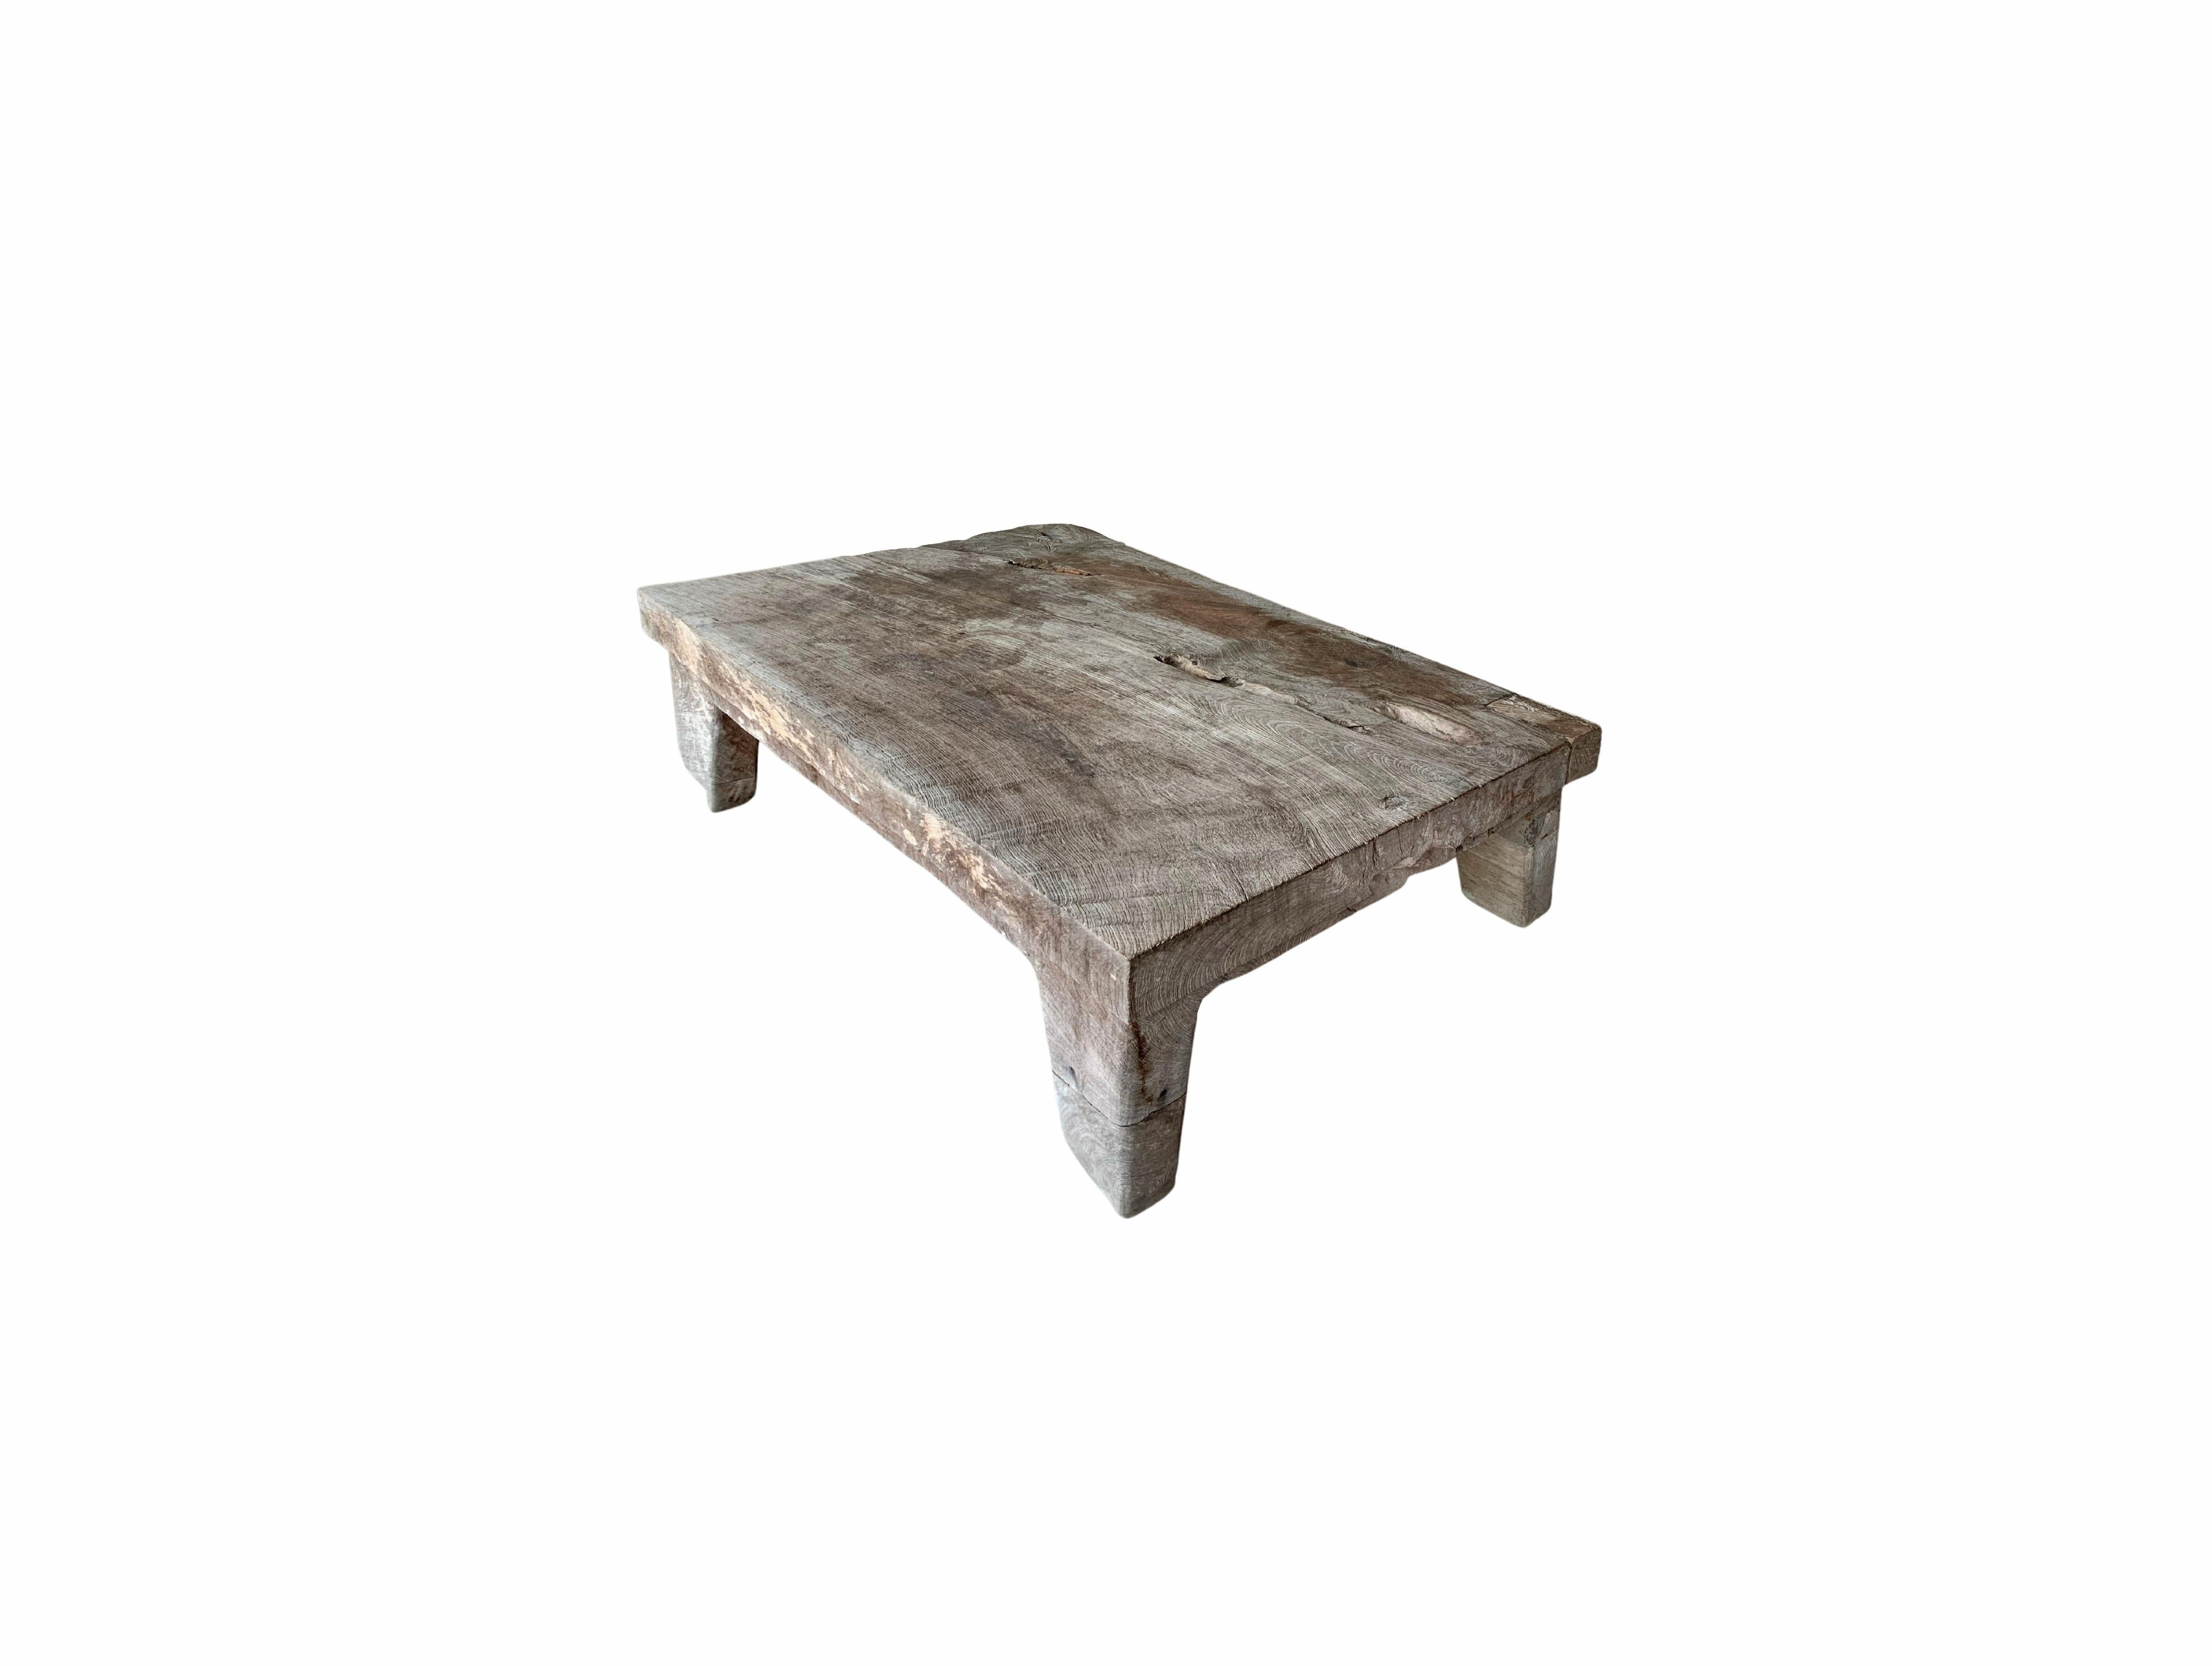 This solid teak coffee table was crafted on the island of Madura off the Northeastern coast of Java, Indonesia. It features angular legs that follow the curvature of each corner. A wonderful addition to any space. The fading of the wood, age-related